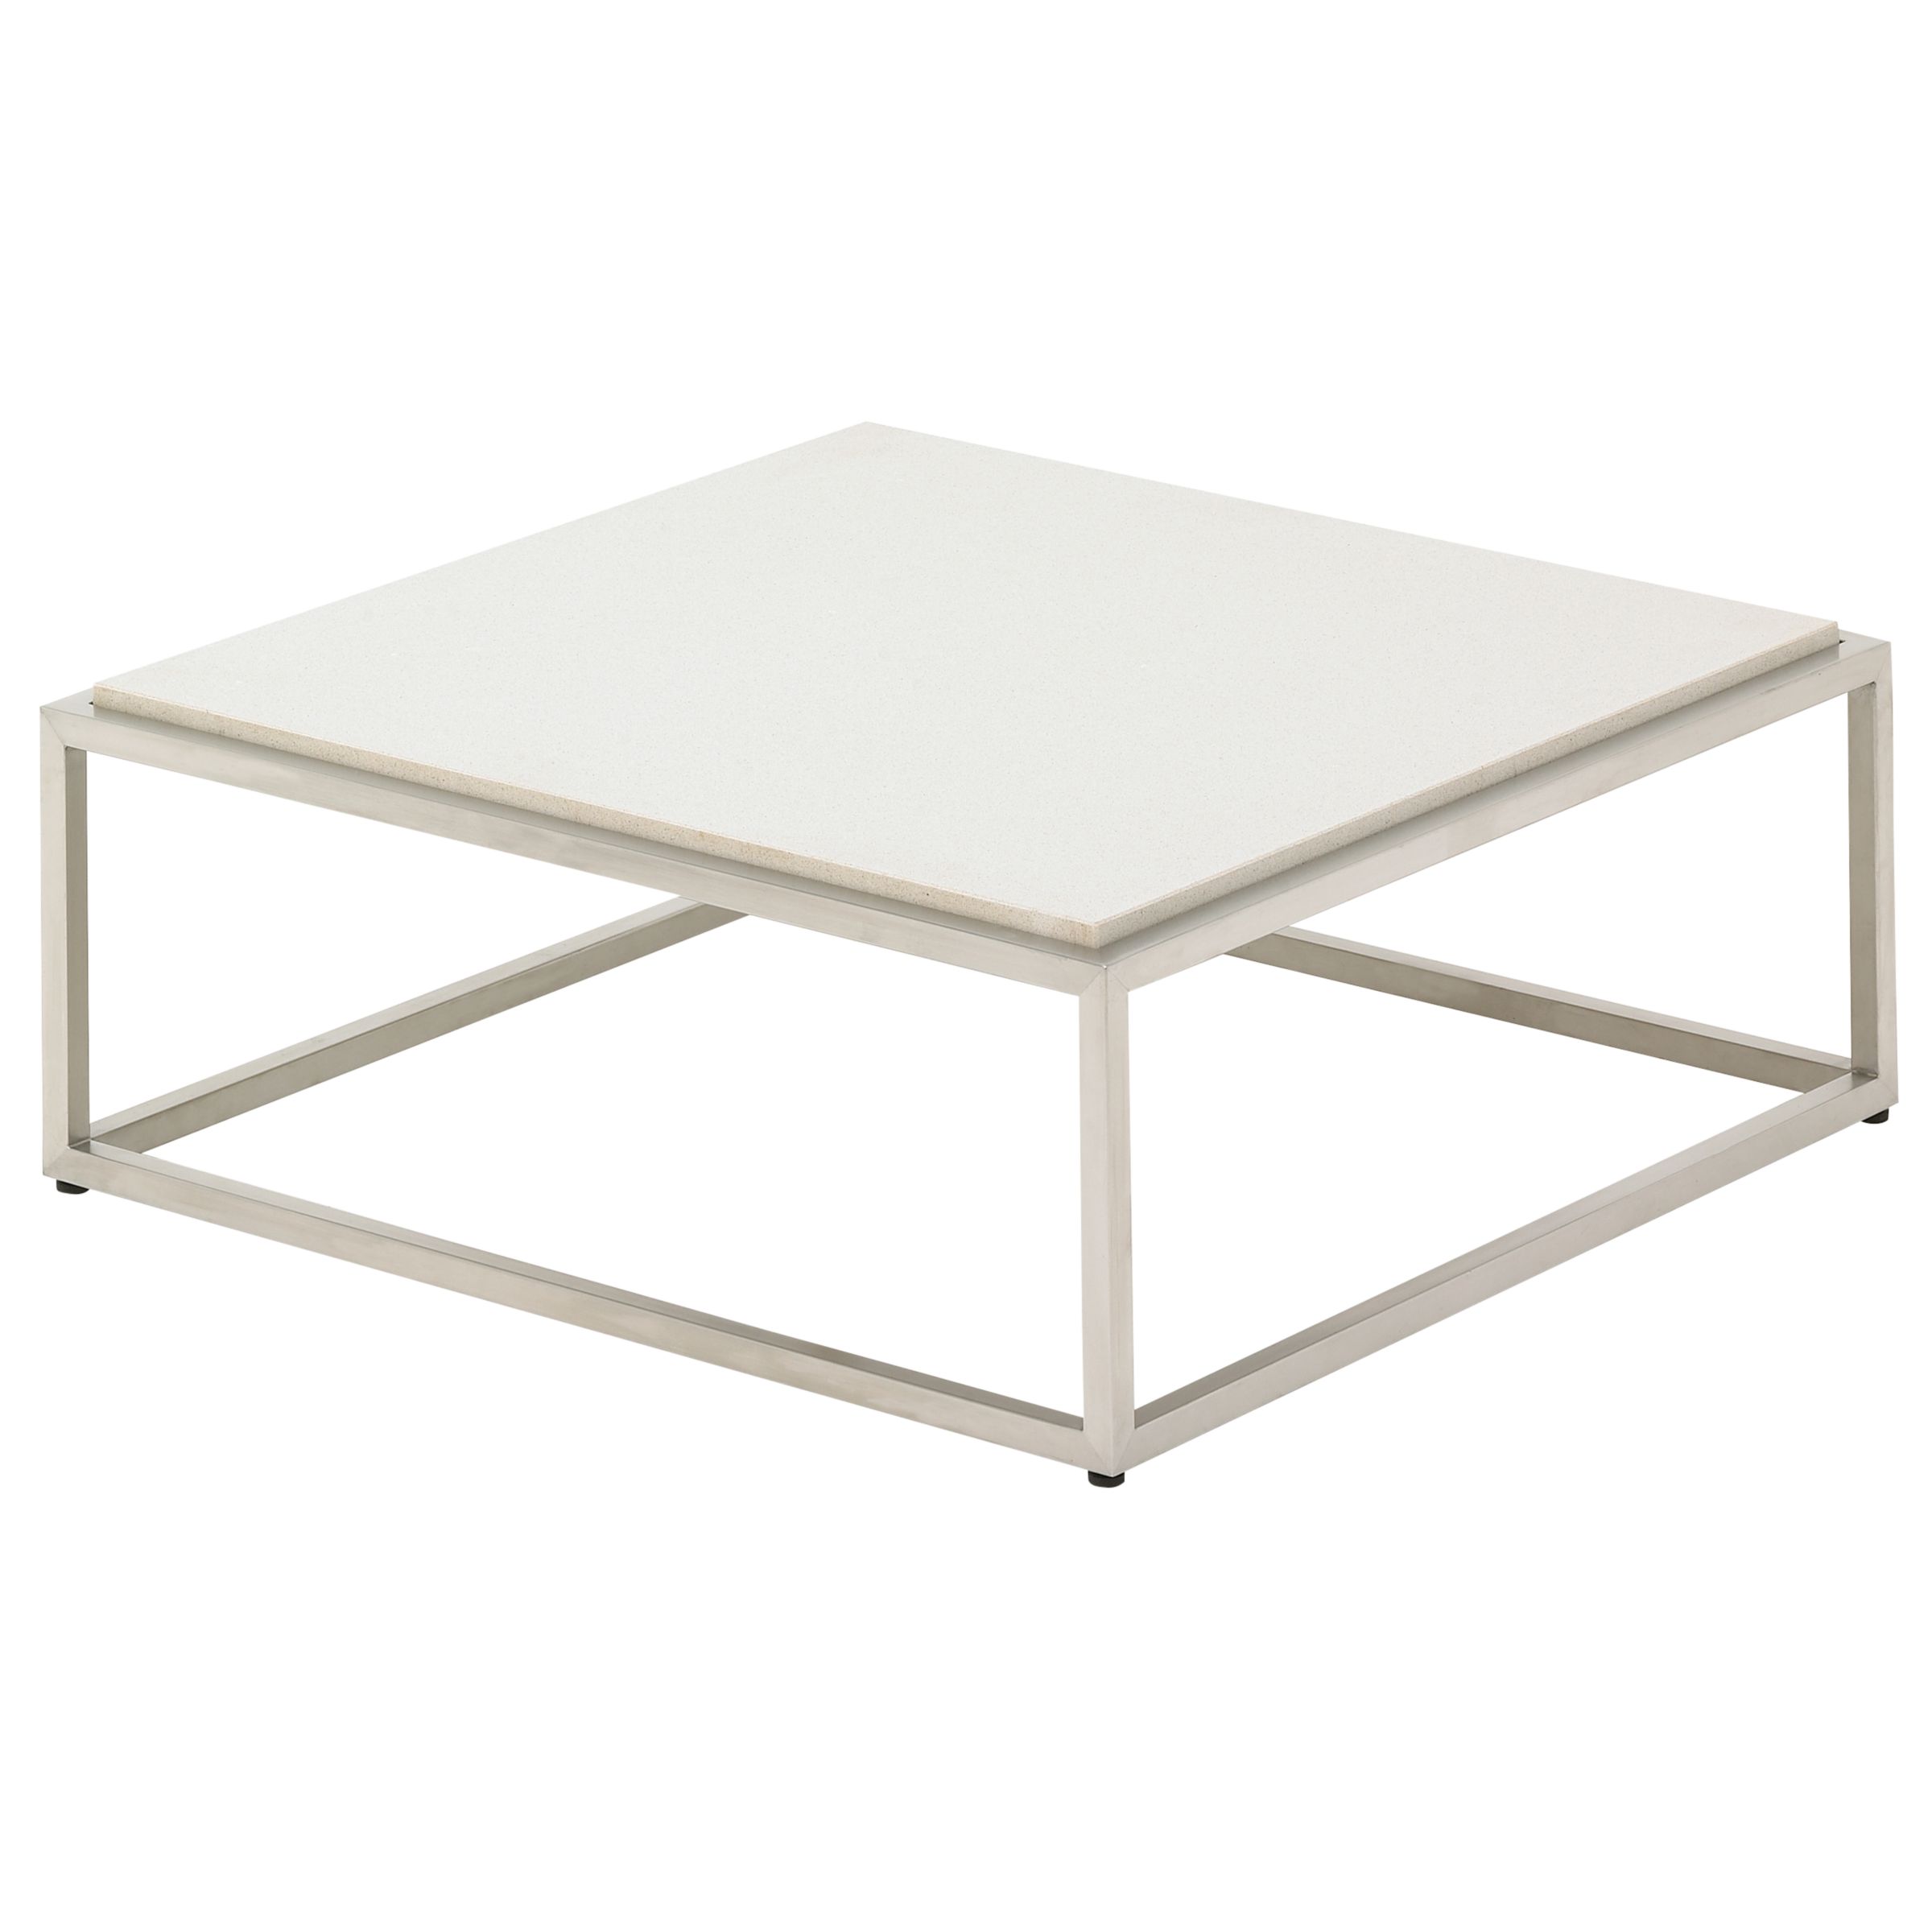 Gloster Cloud Square Outdoor Coffee Table, Quartz Top, Ivory, 75 x 75cm, width 75cm